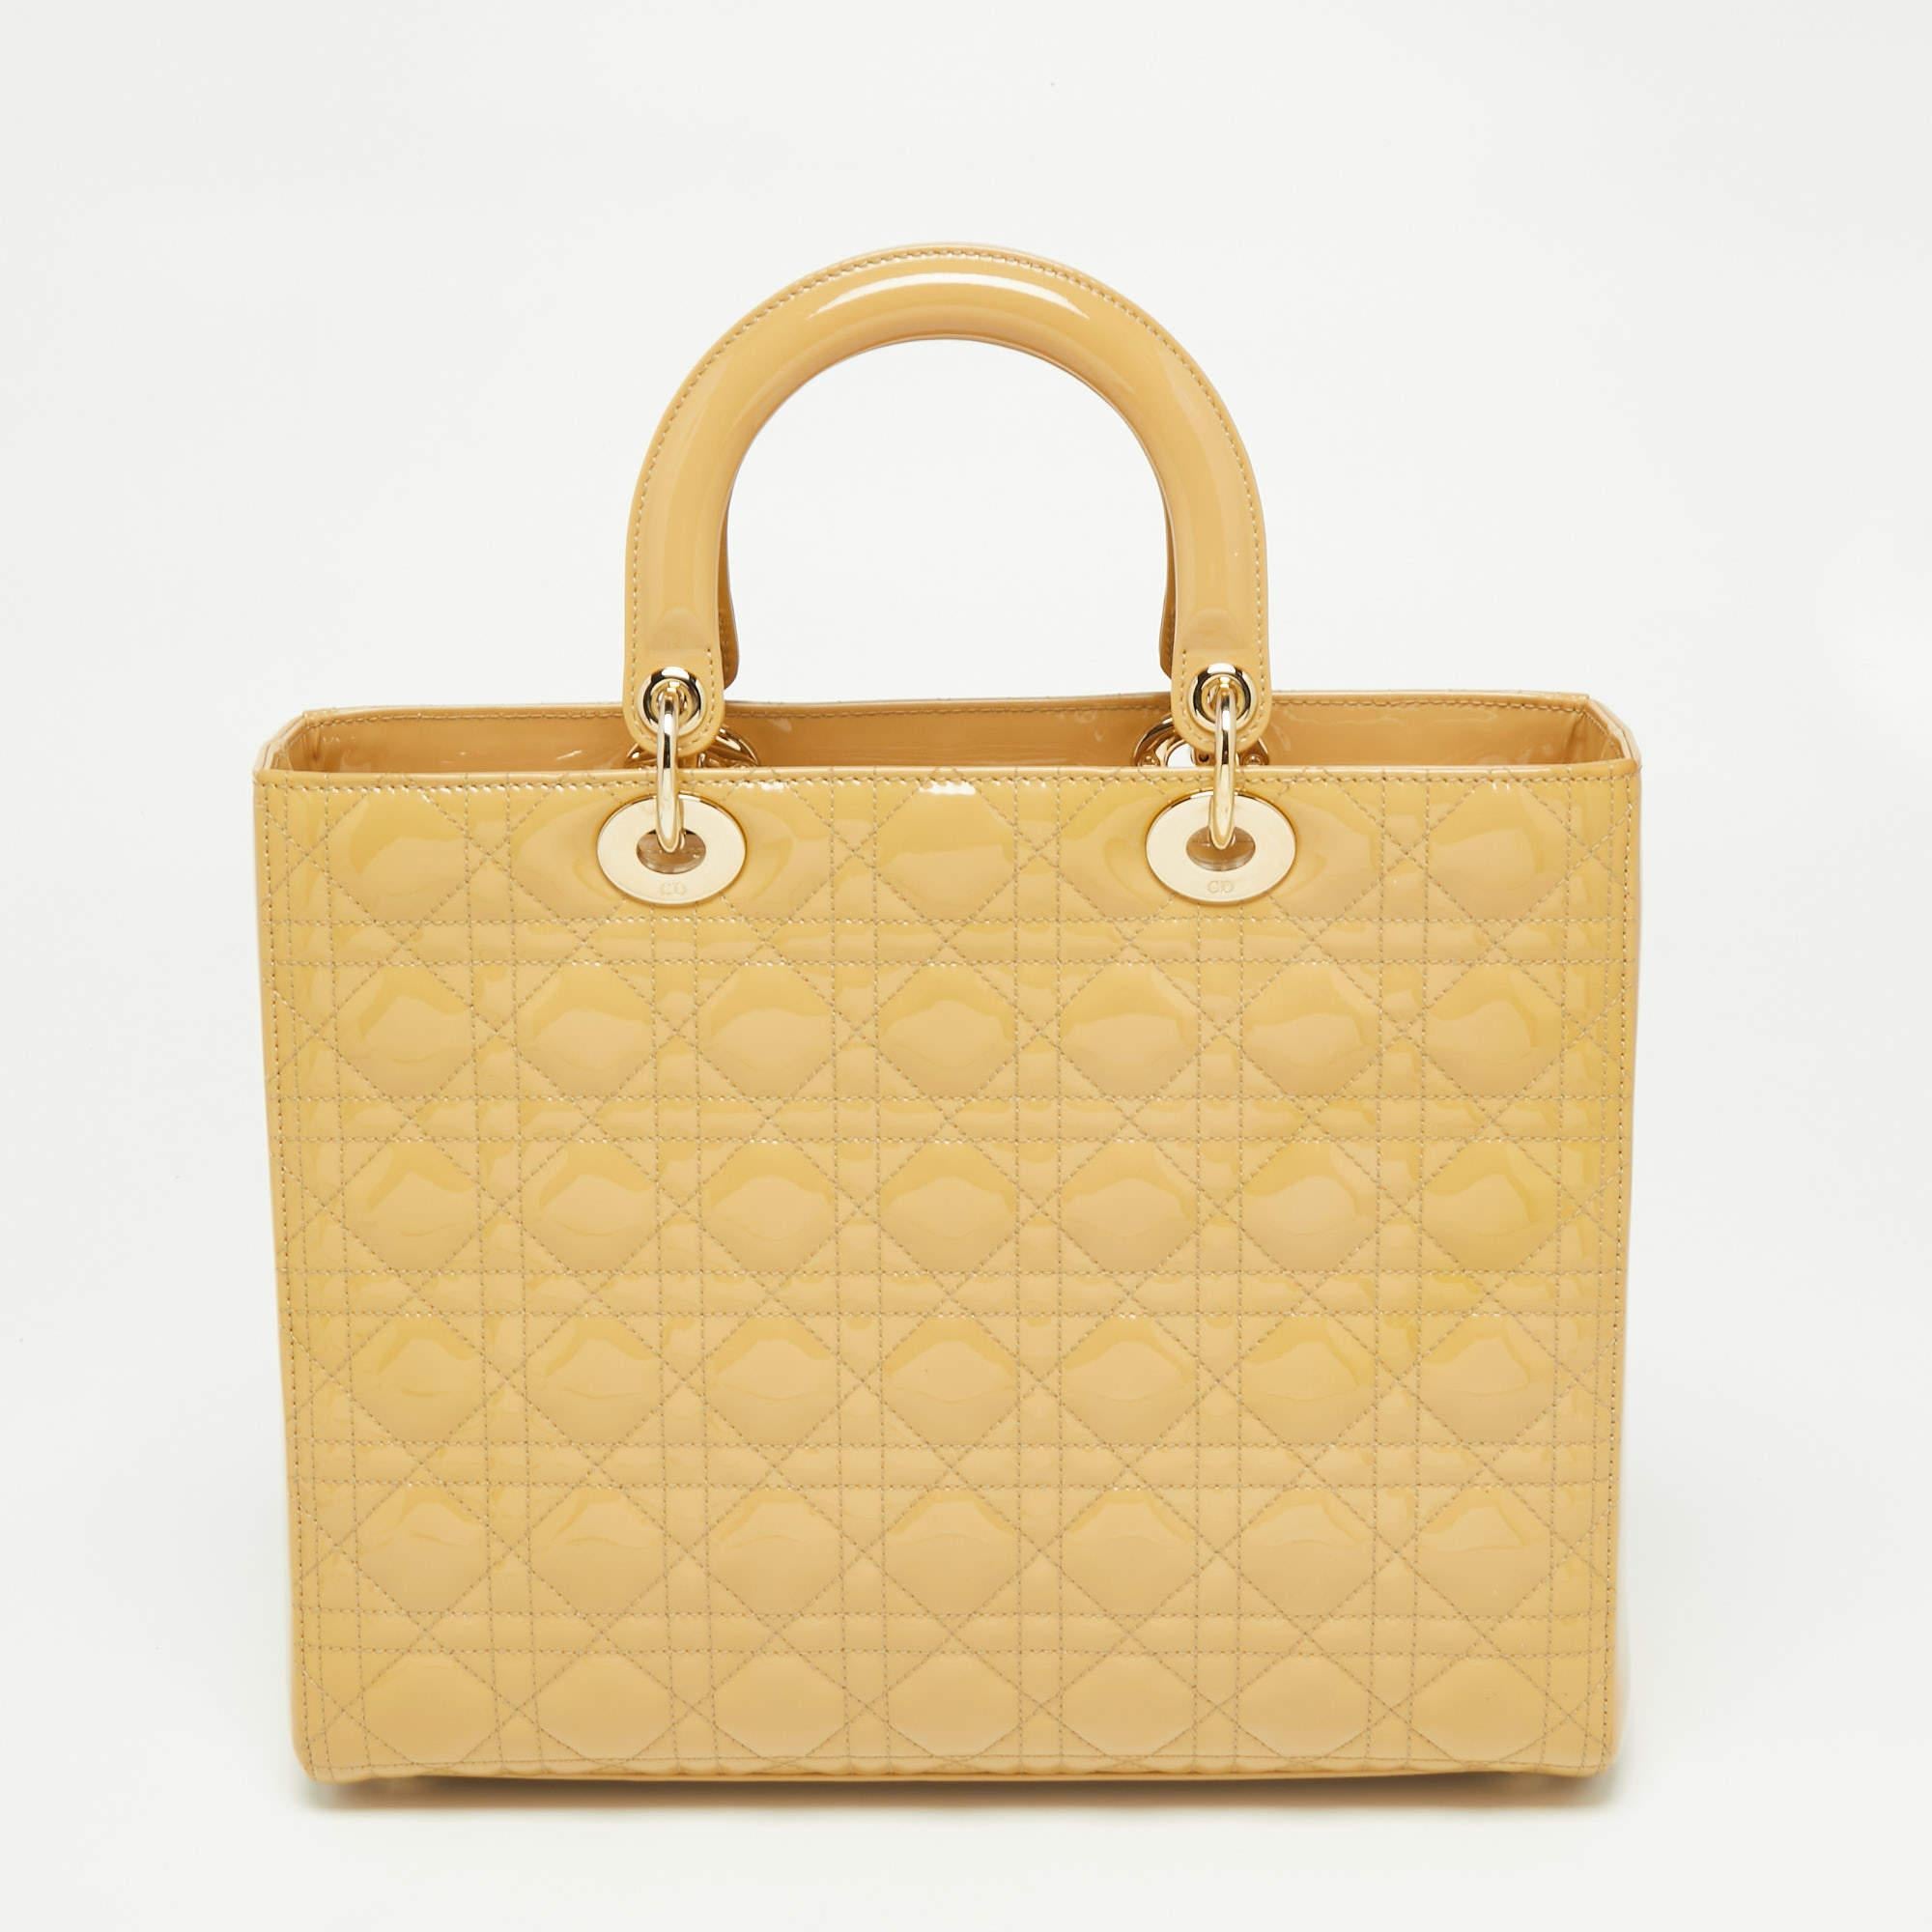 The Lady Dior tote is a Dior creation that has gained wide recognition and is a coveted bag that every fashionista craves to possess. The beige tote has been crafted from patent leather and carries the signature Cannage quilt. It is equipped with a